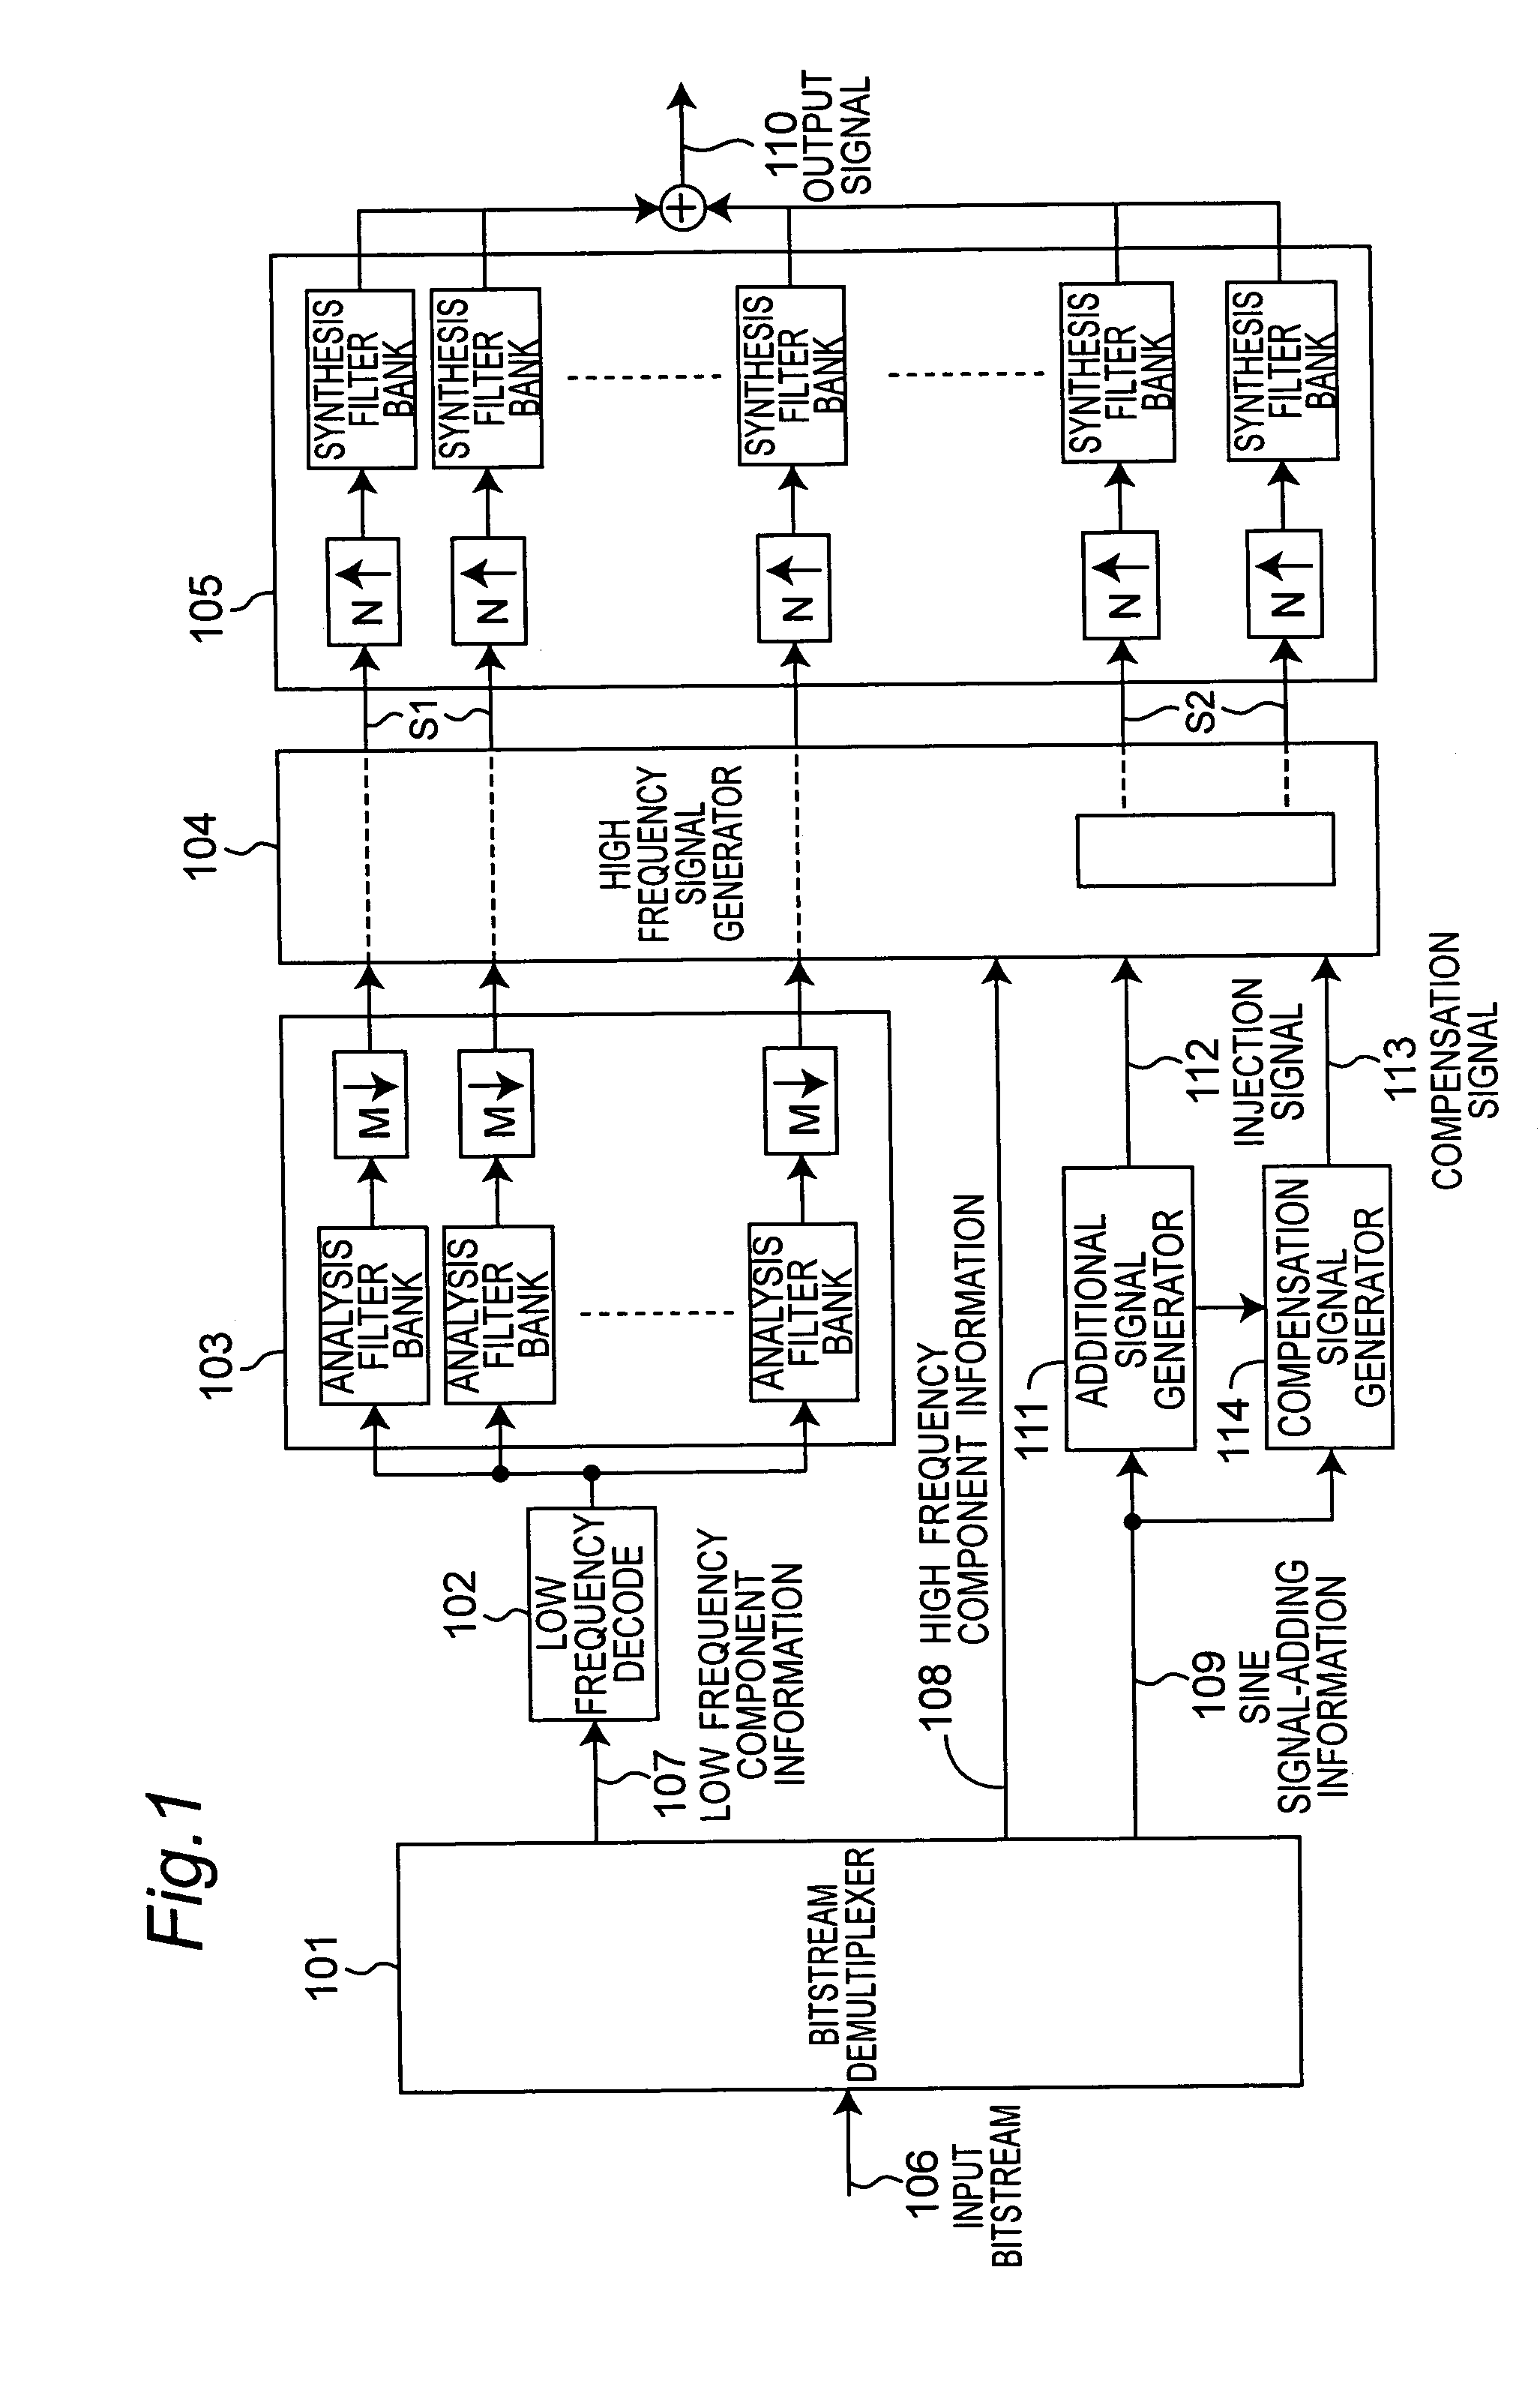 Audio decoding apparatus and method for band expansion with aliasing suppression